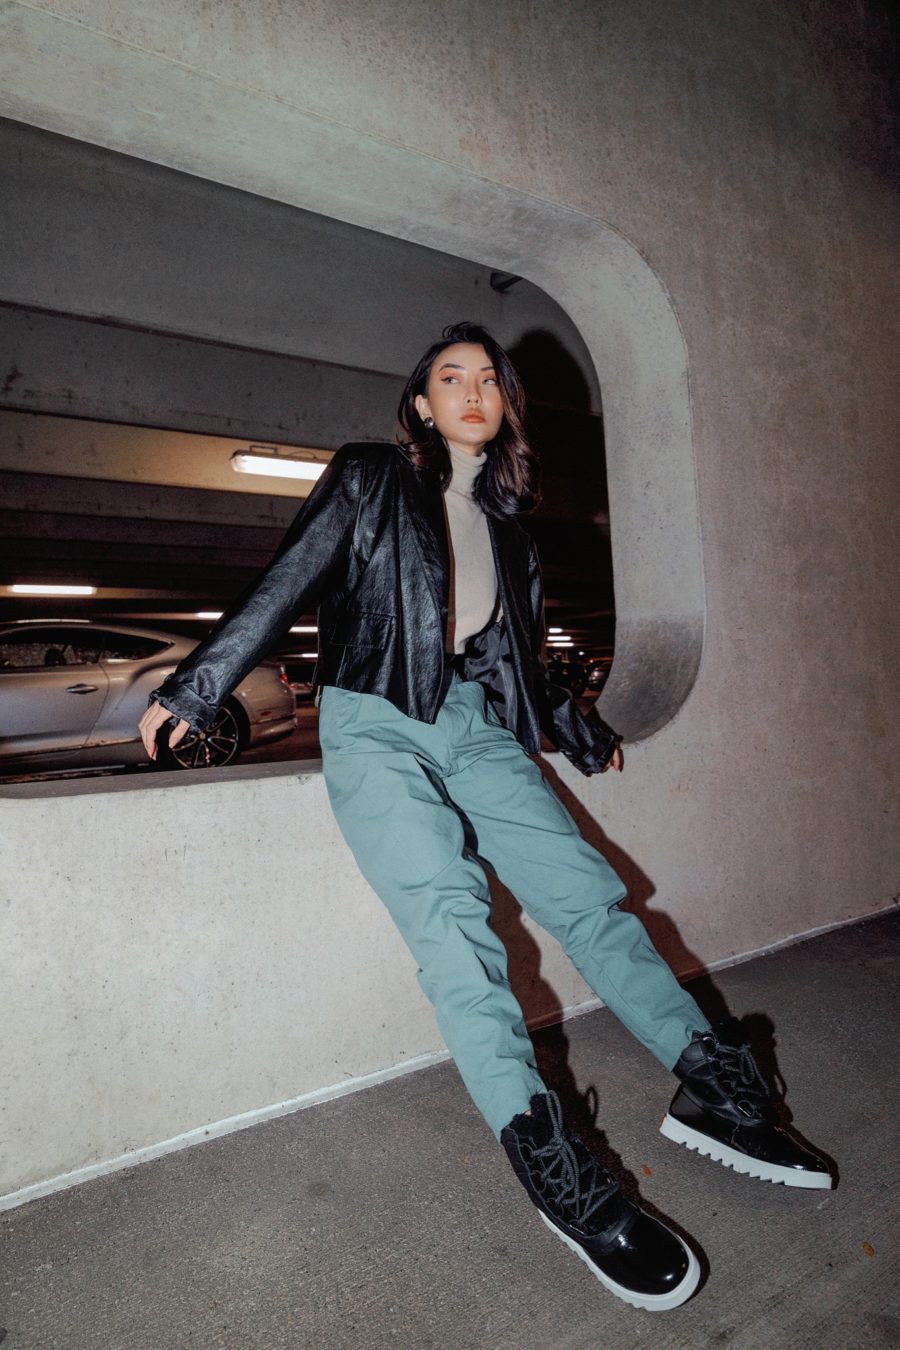 jessica wang wearing sorel winter boots with jeans and a leather jacket // Jessica Wang - Notjessfashion.com